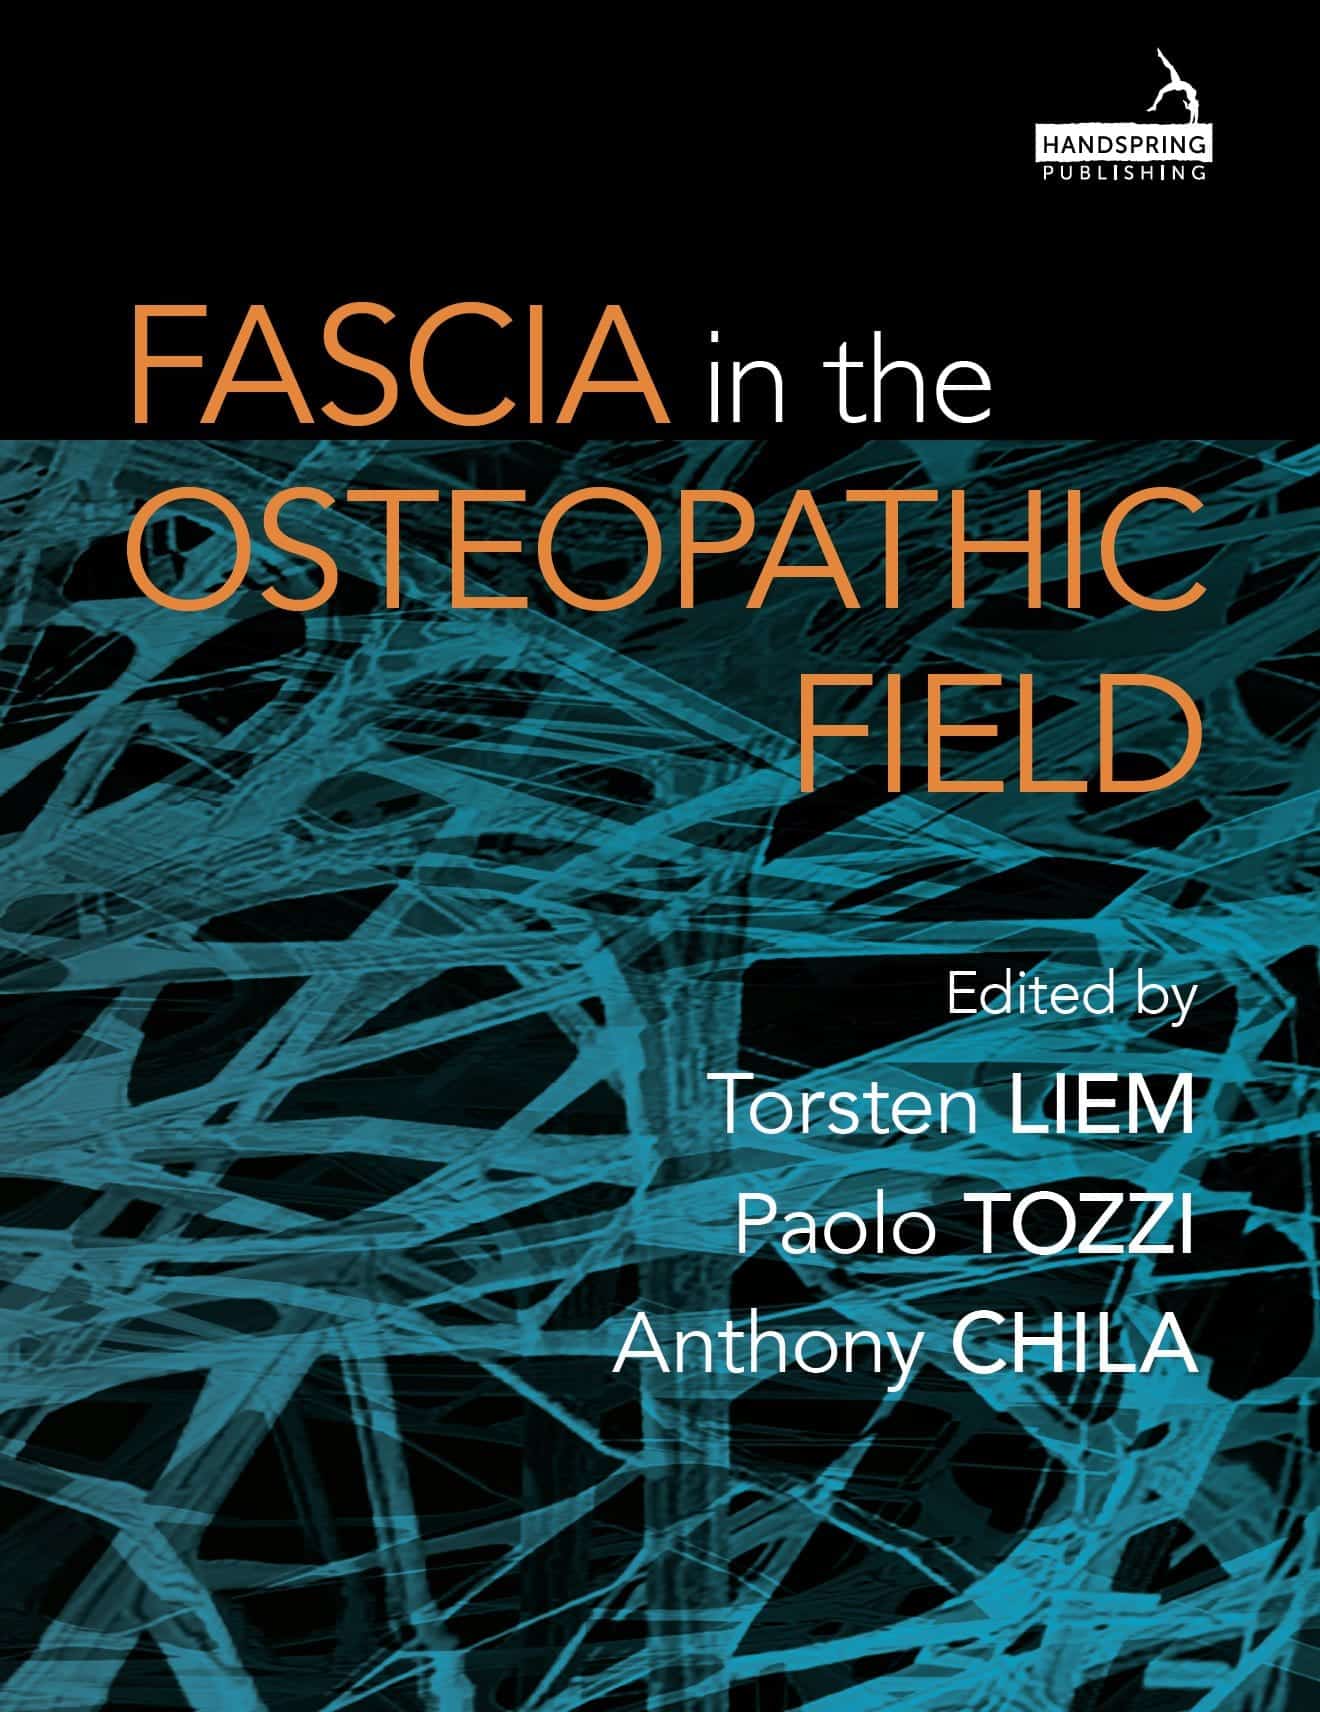 INTRODUCTION to Fascia in the Osteopathic Field min